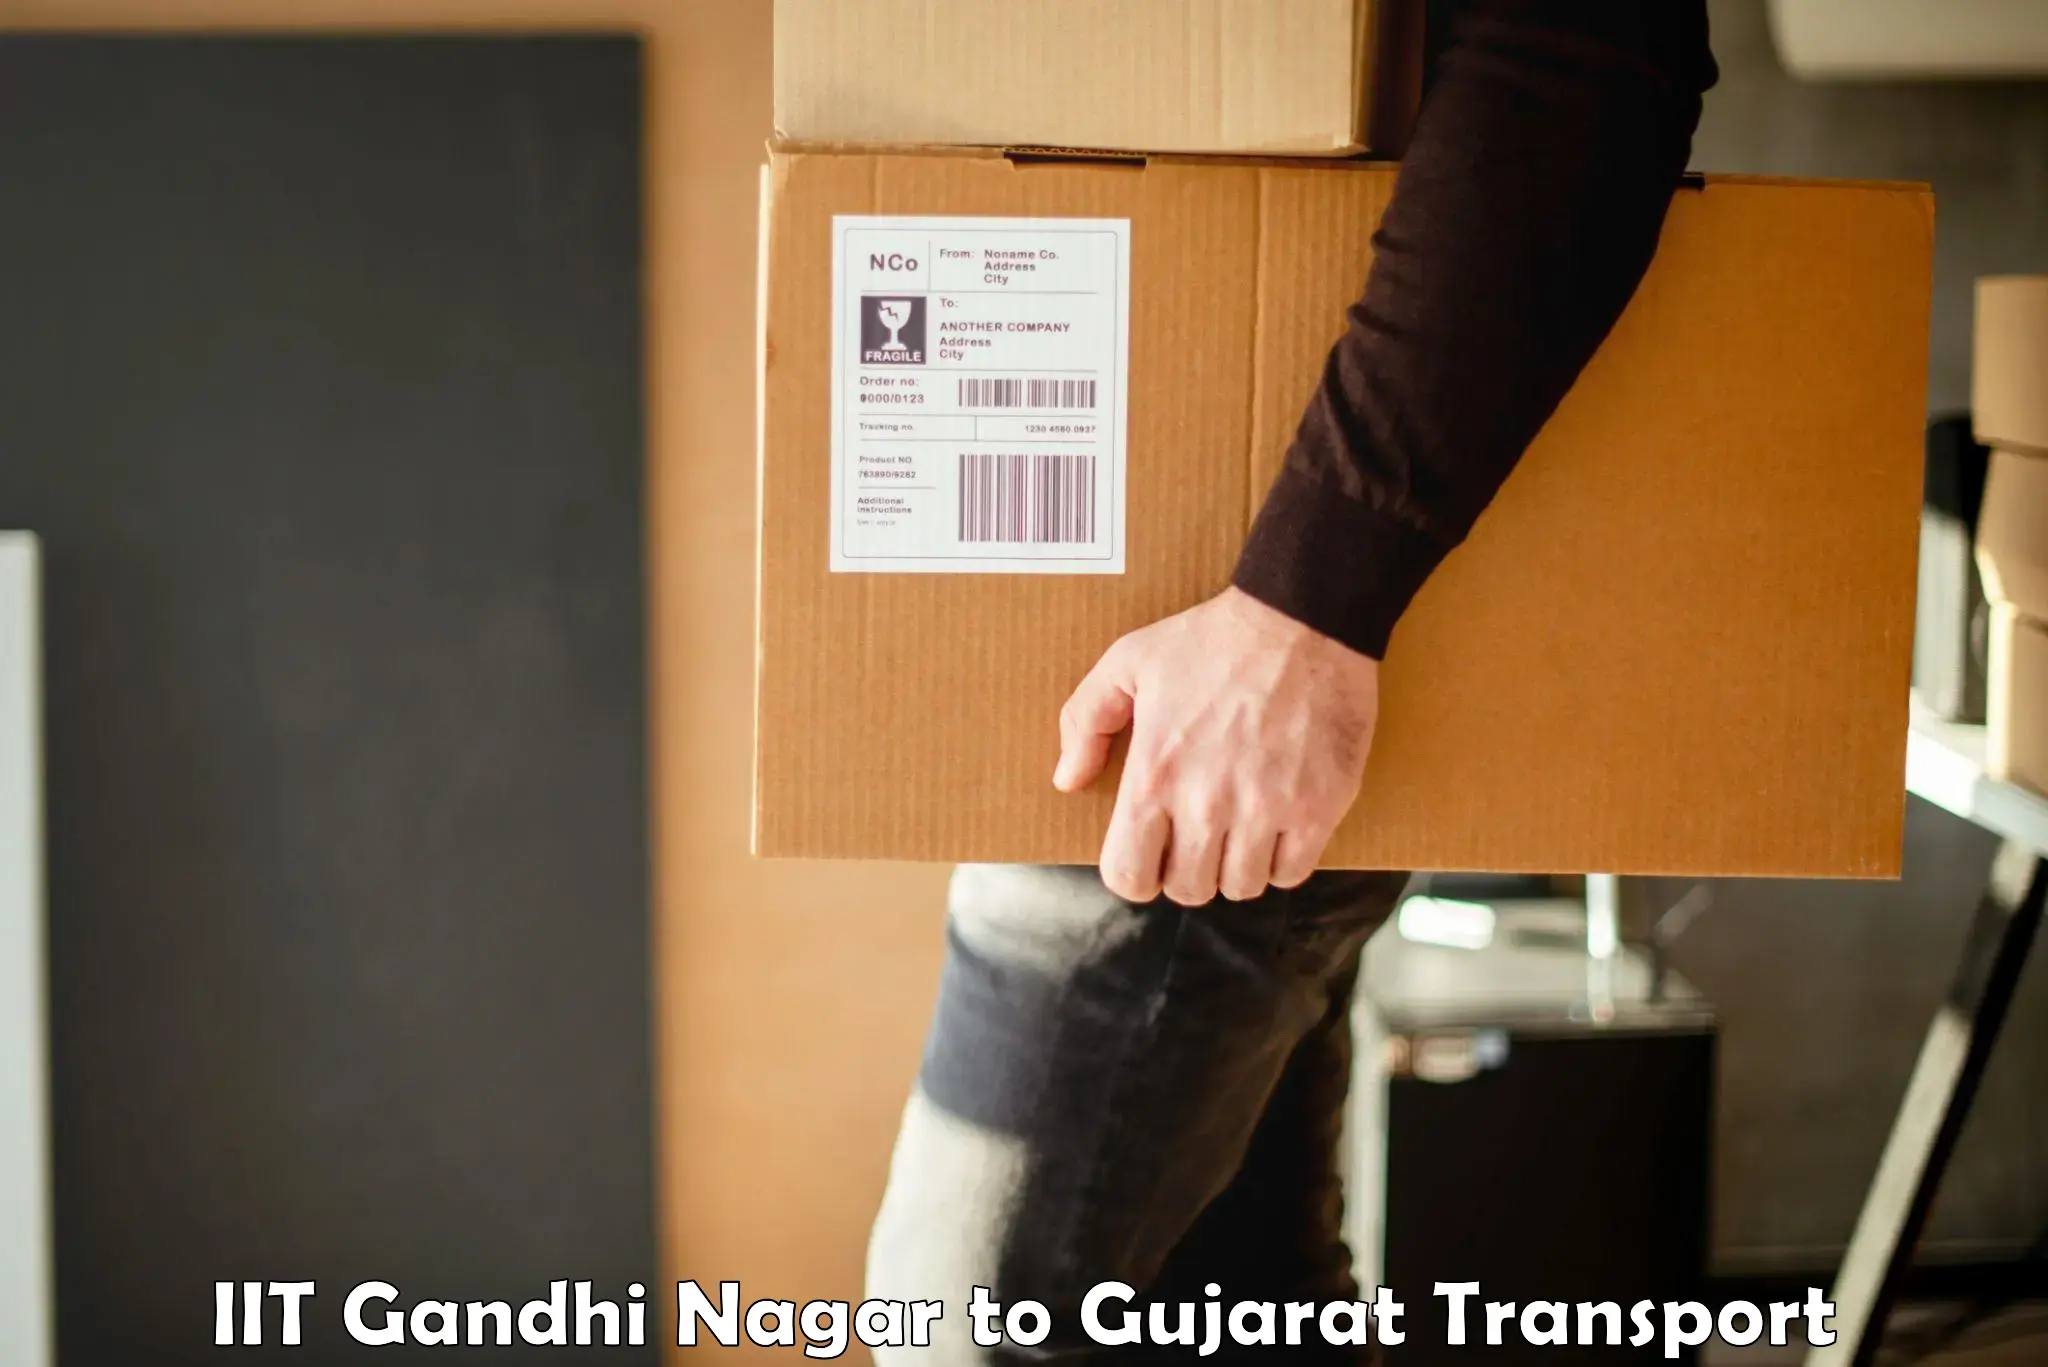 Transport bike from one state to another IIT Gandhi Nagar to Matar